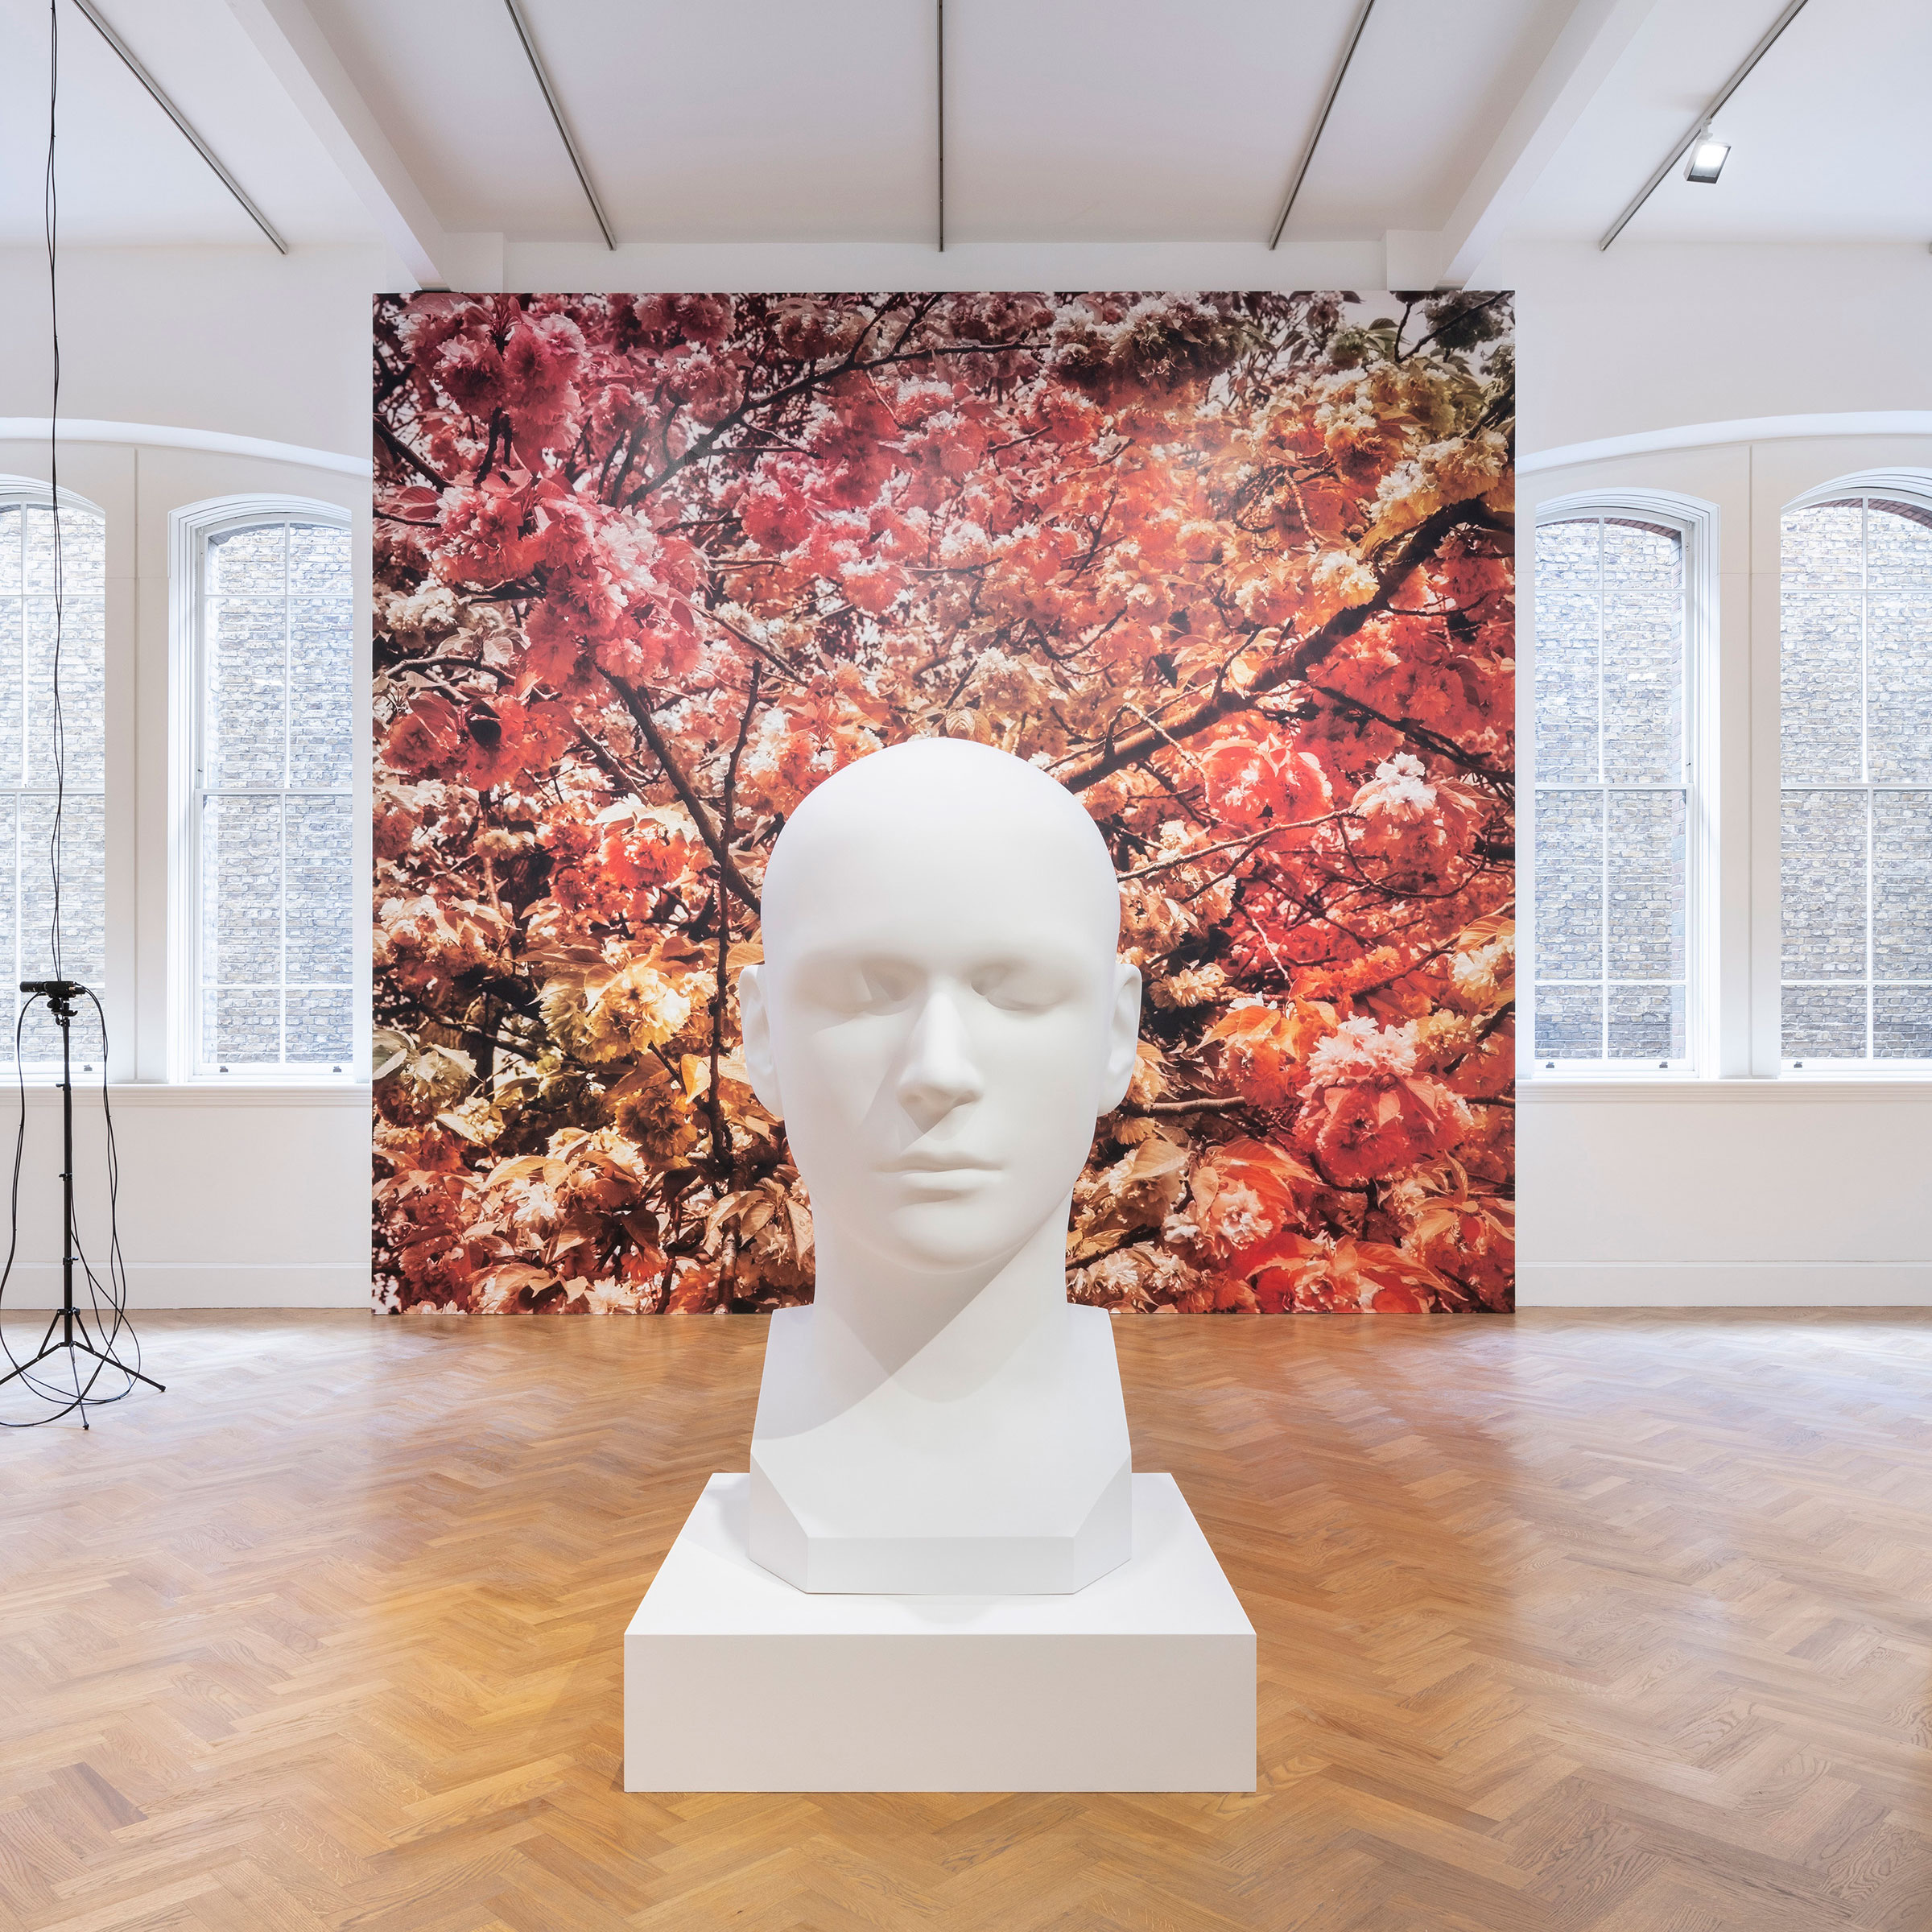 Installation view of Bloom, Trevor Paglen's new exhibition at Pace, London, September 2020